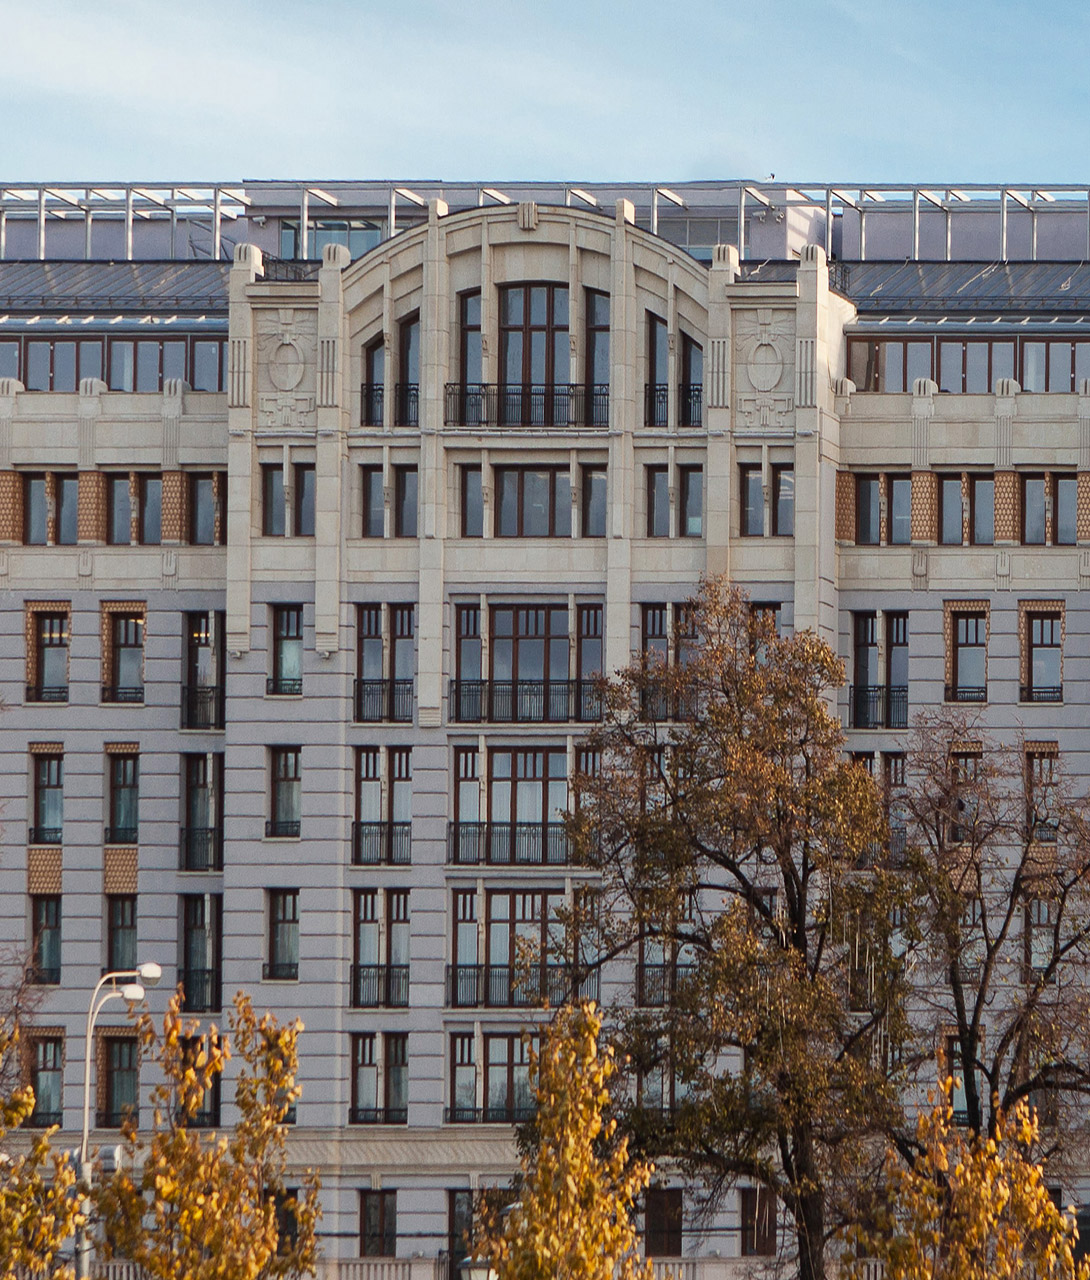 Standart Hotel Moscow Architecture Facade K 01 X2